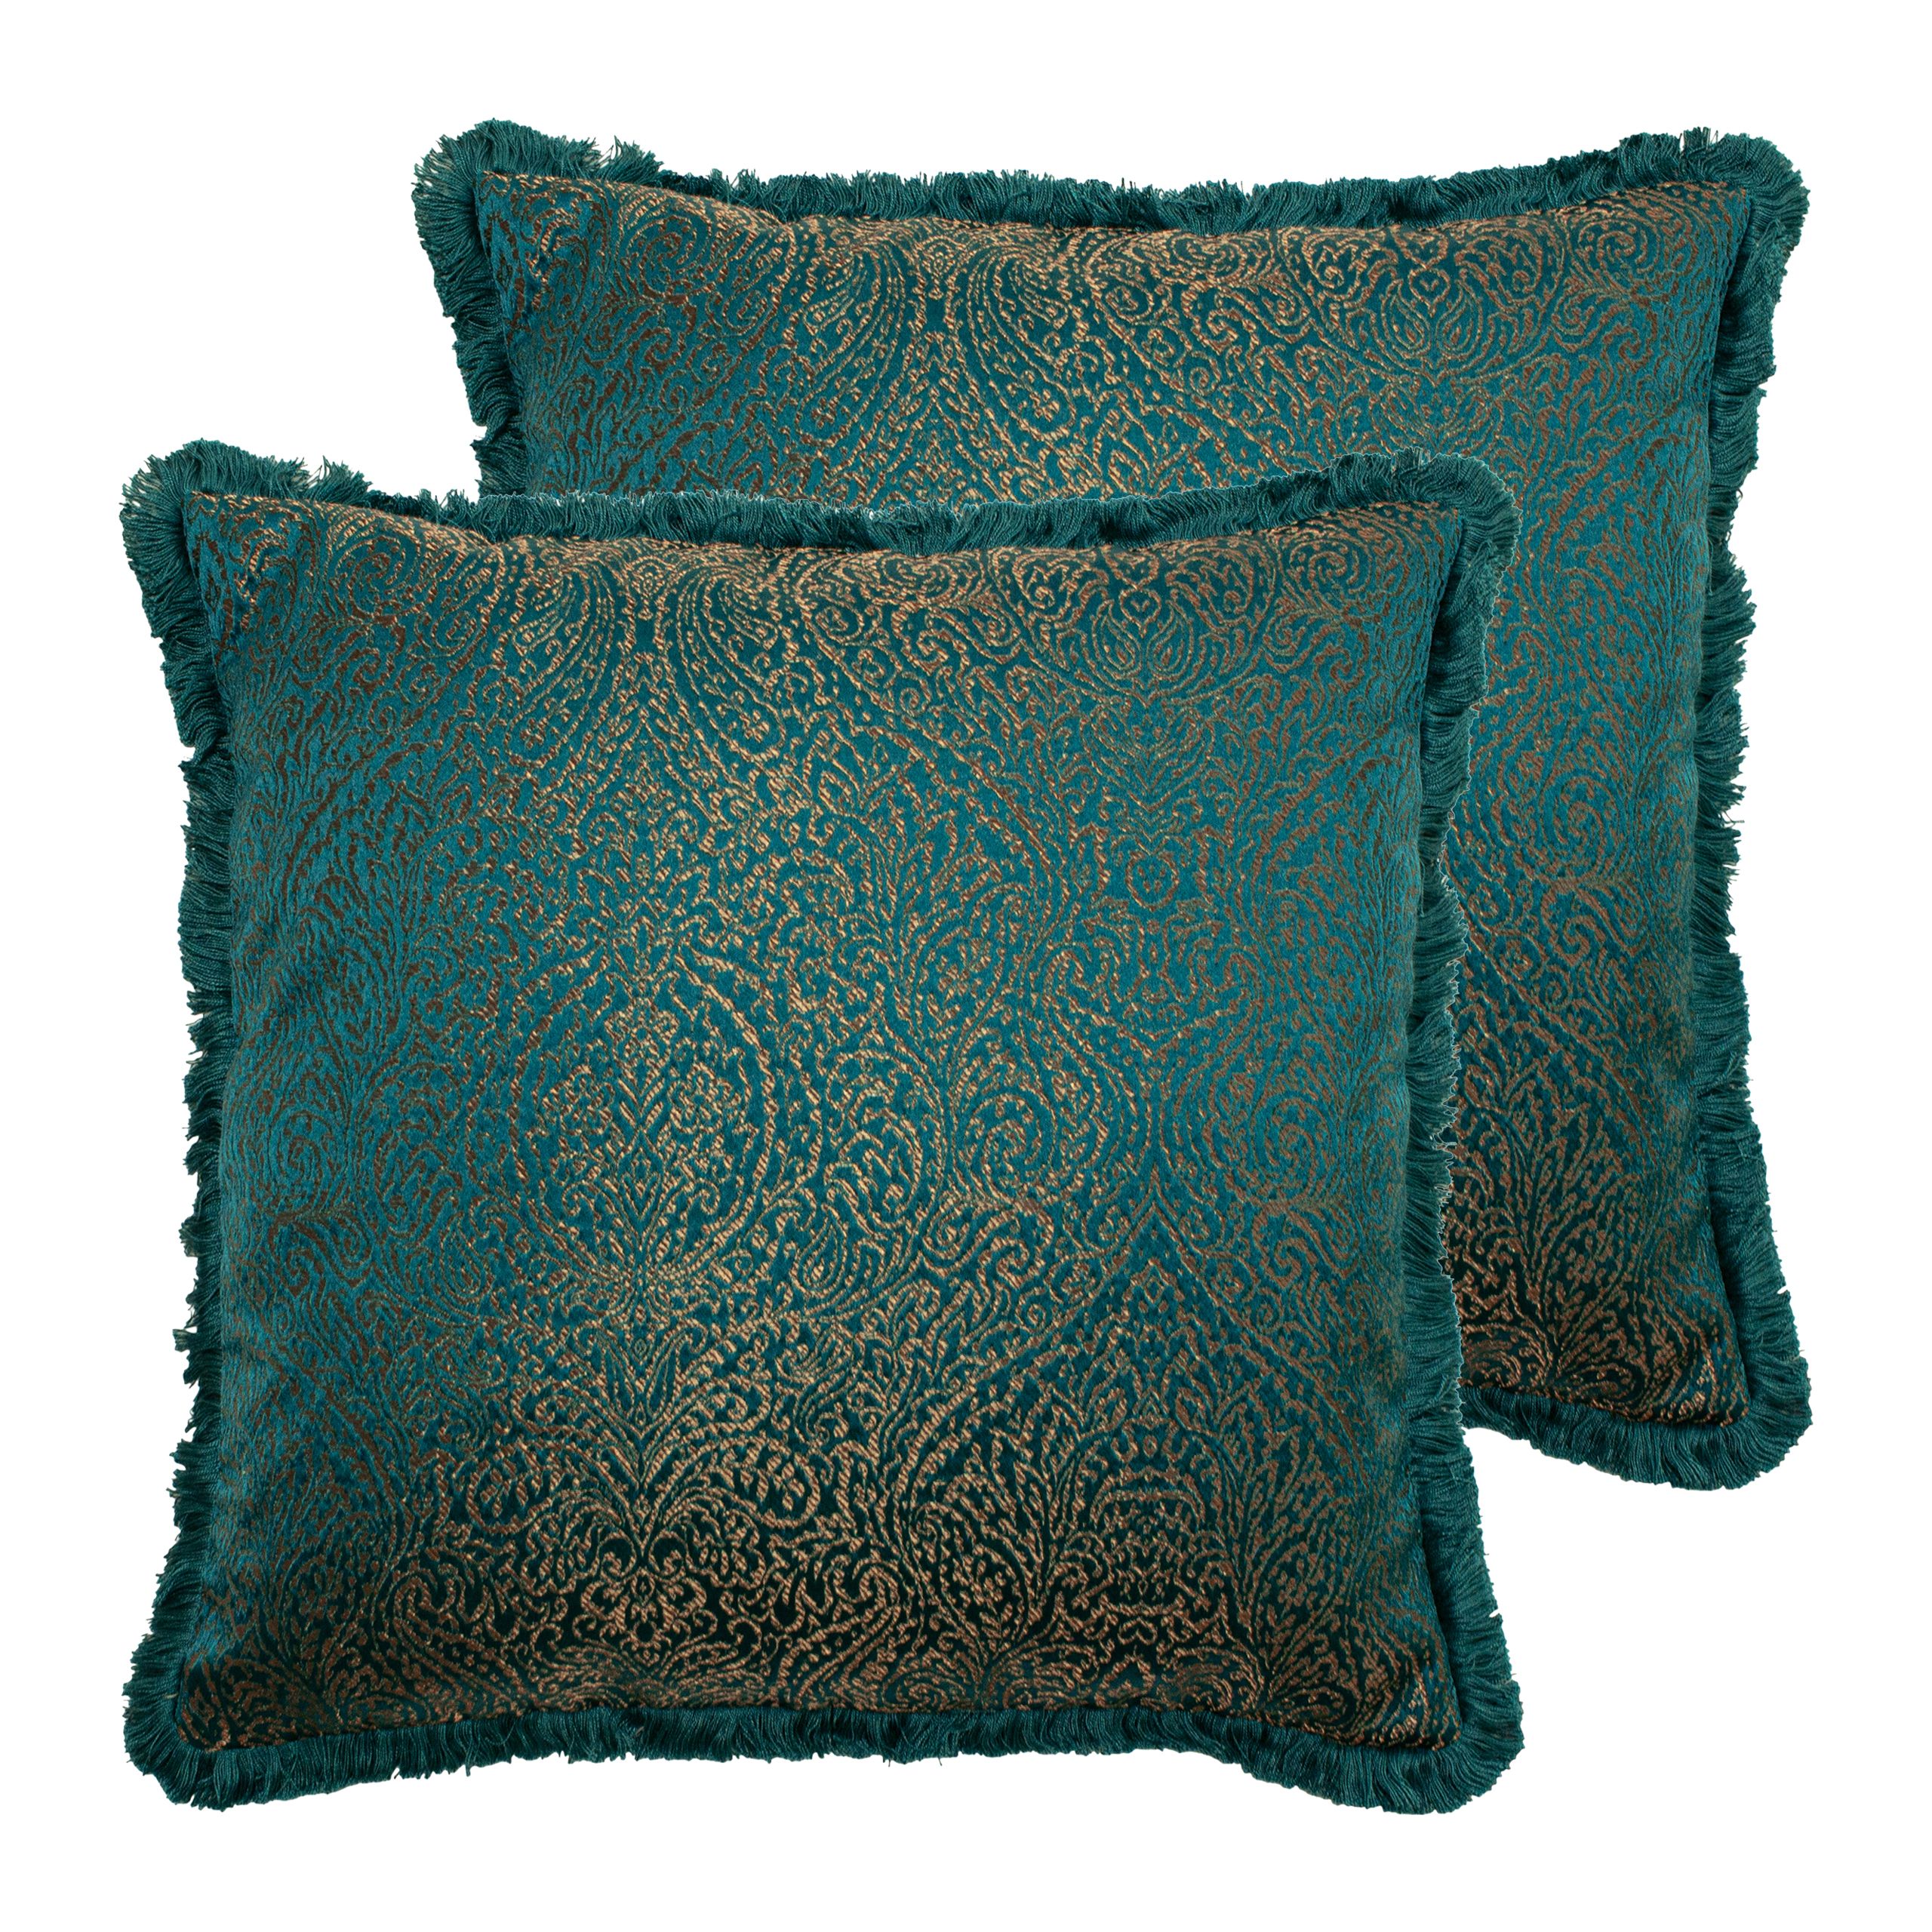 Elegant and luxurious, the Coco cushion features a shimmering silk-look jacquard design and the softest ruffle fringe trim. Style in front of pillows on the bed, or on any sofa or chair for instant opulence.